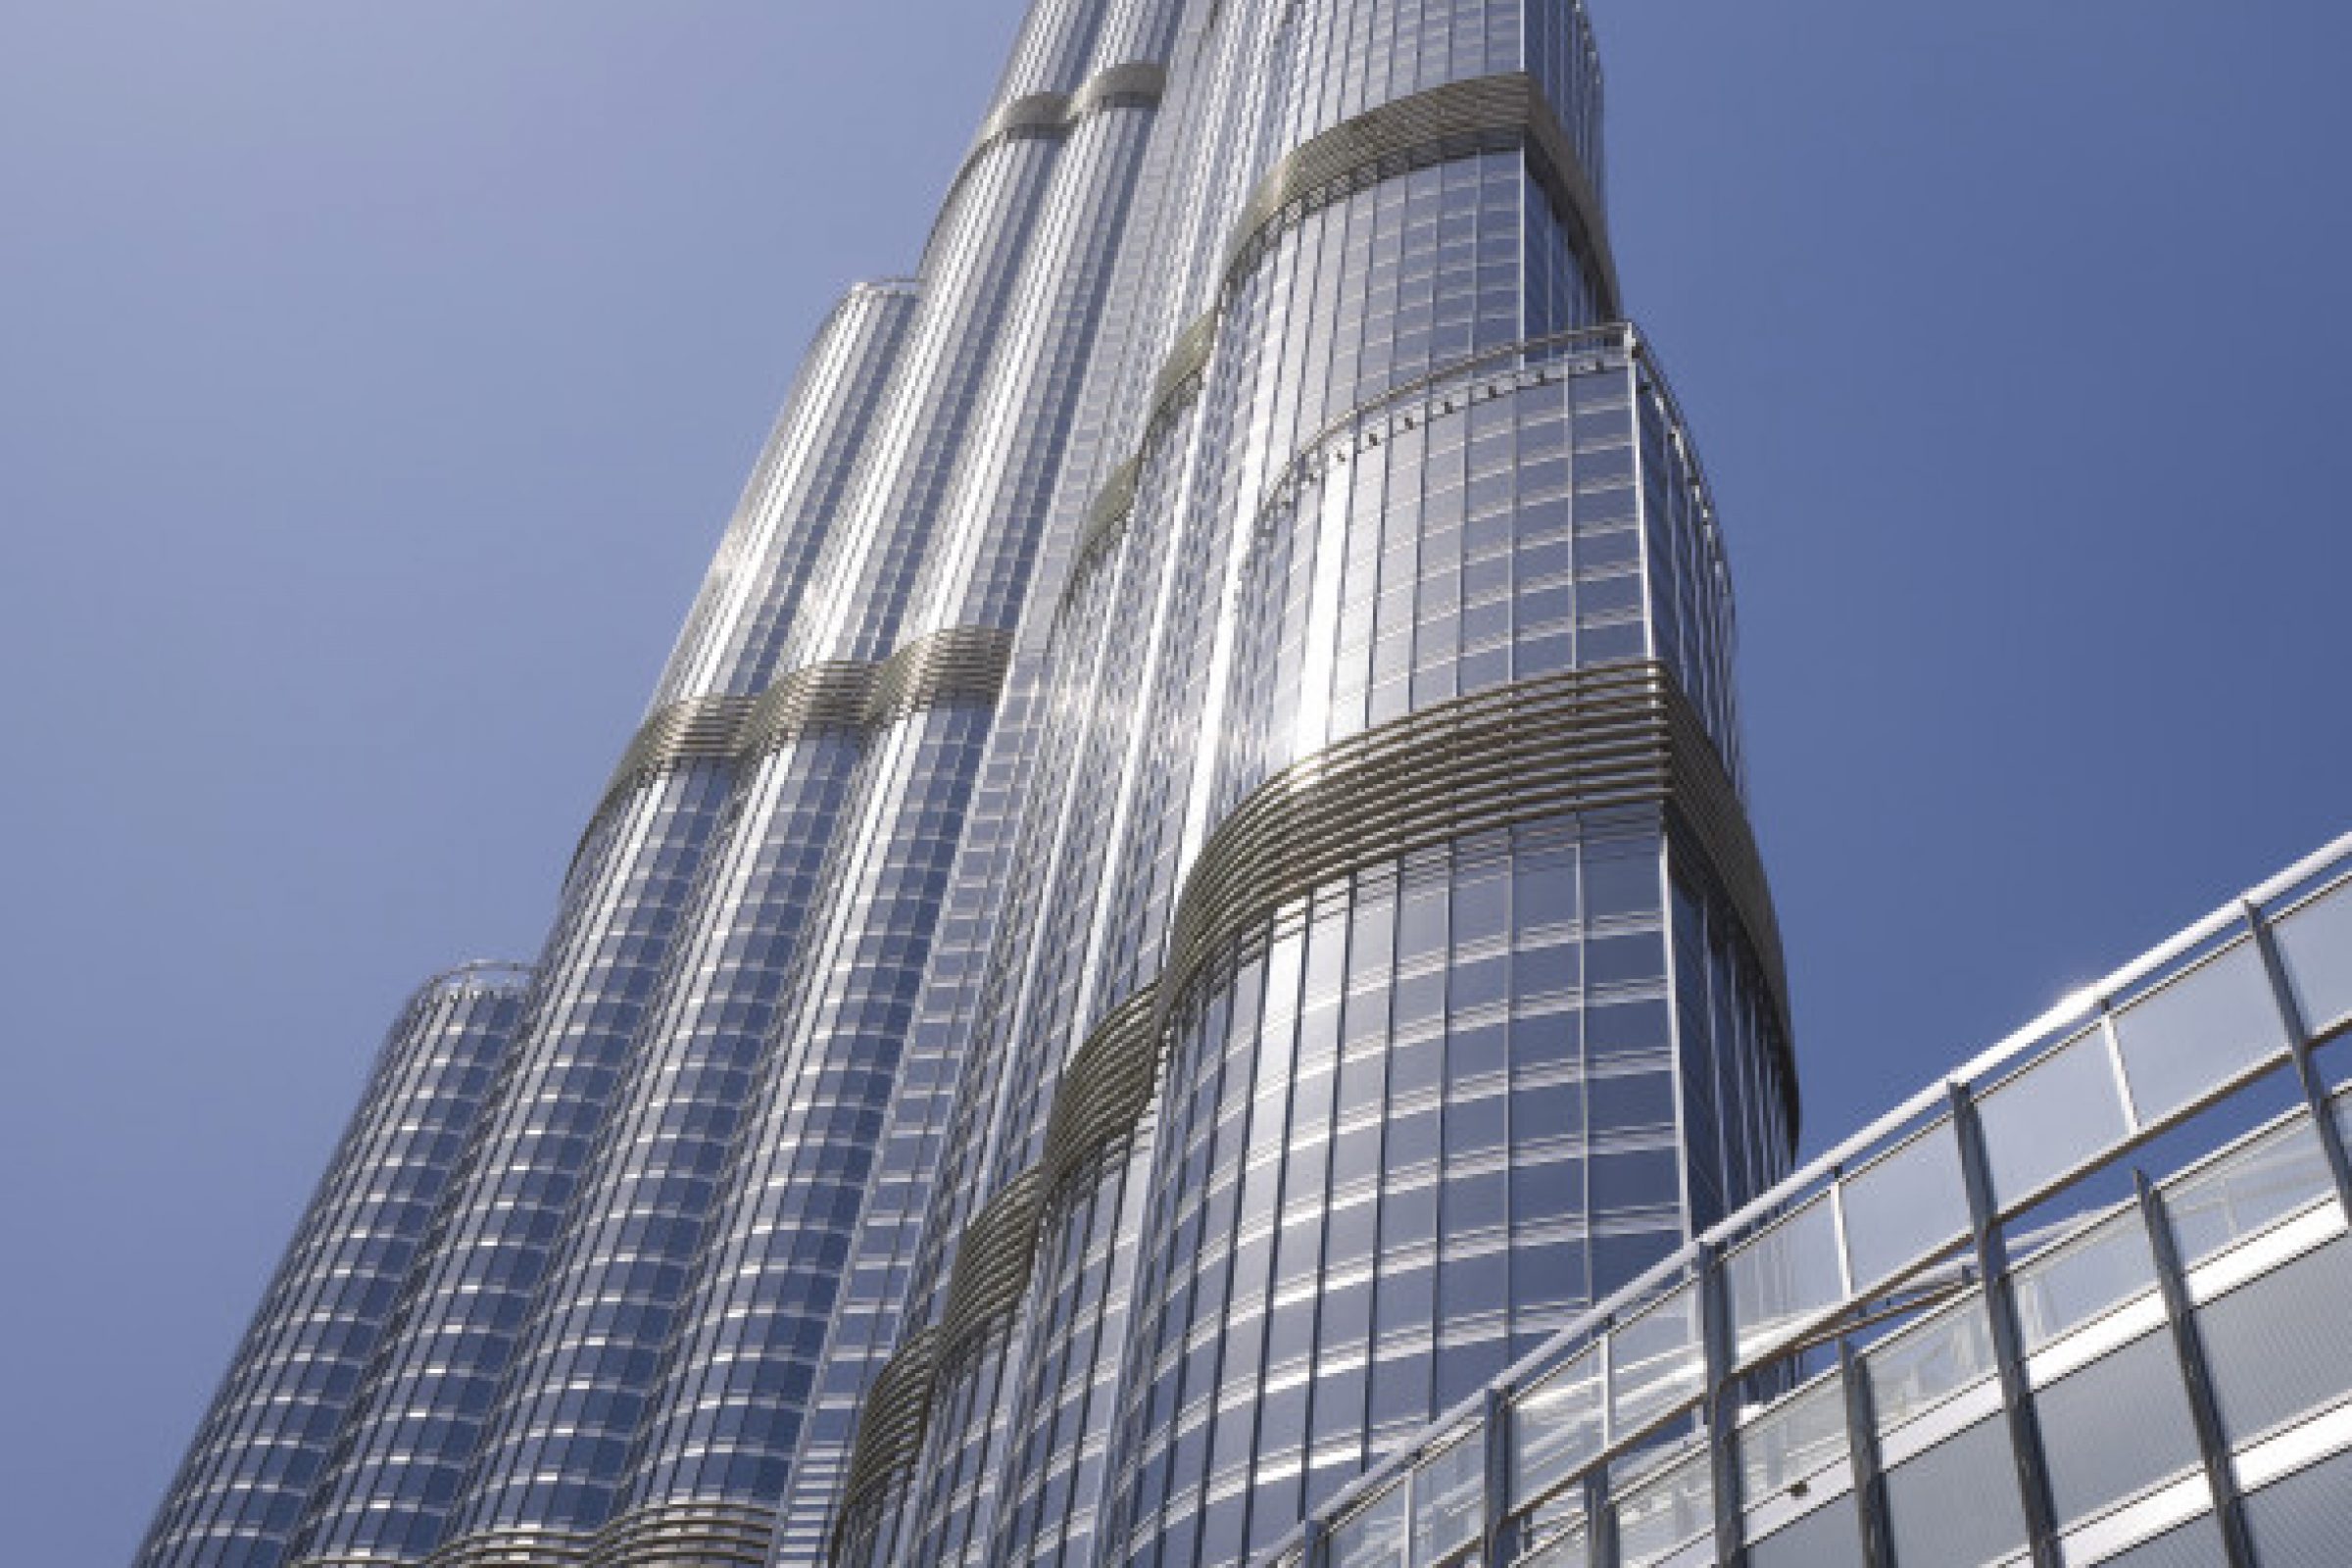 Top 30 Tallest Building in The World in 2021-Part 1